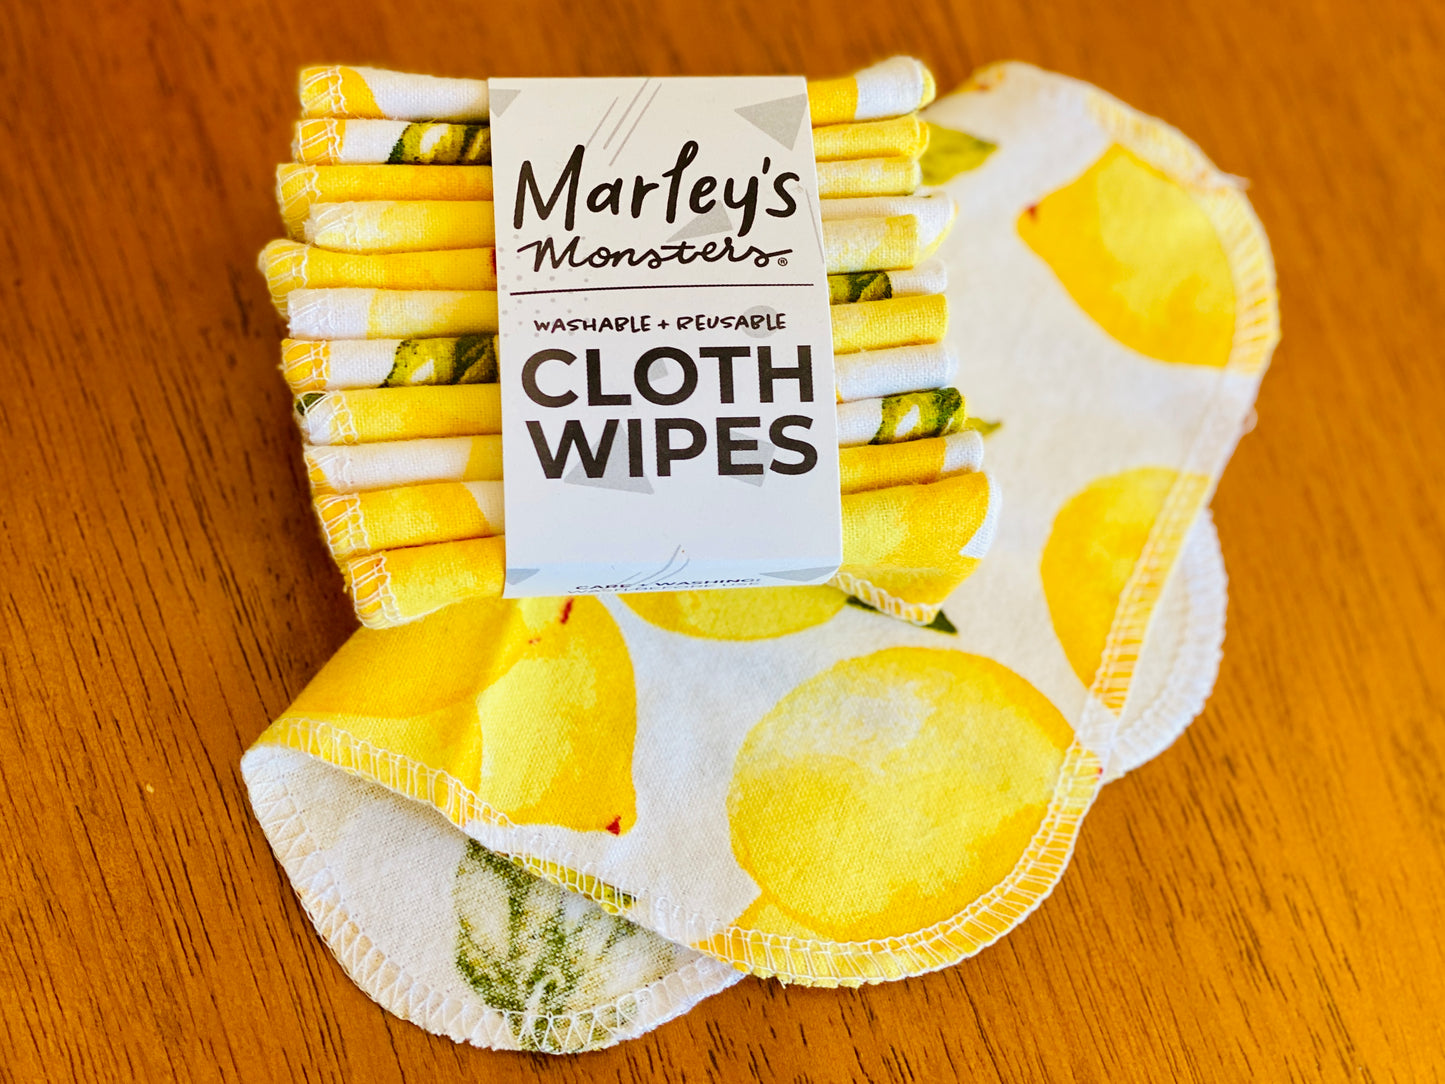 Marley's Monsters - 12 cloth wipes